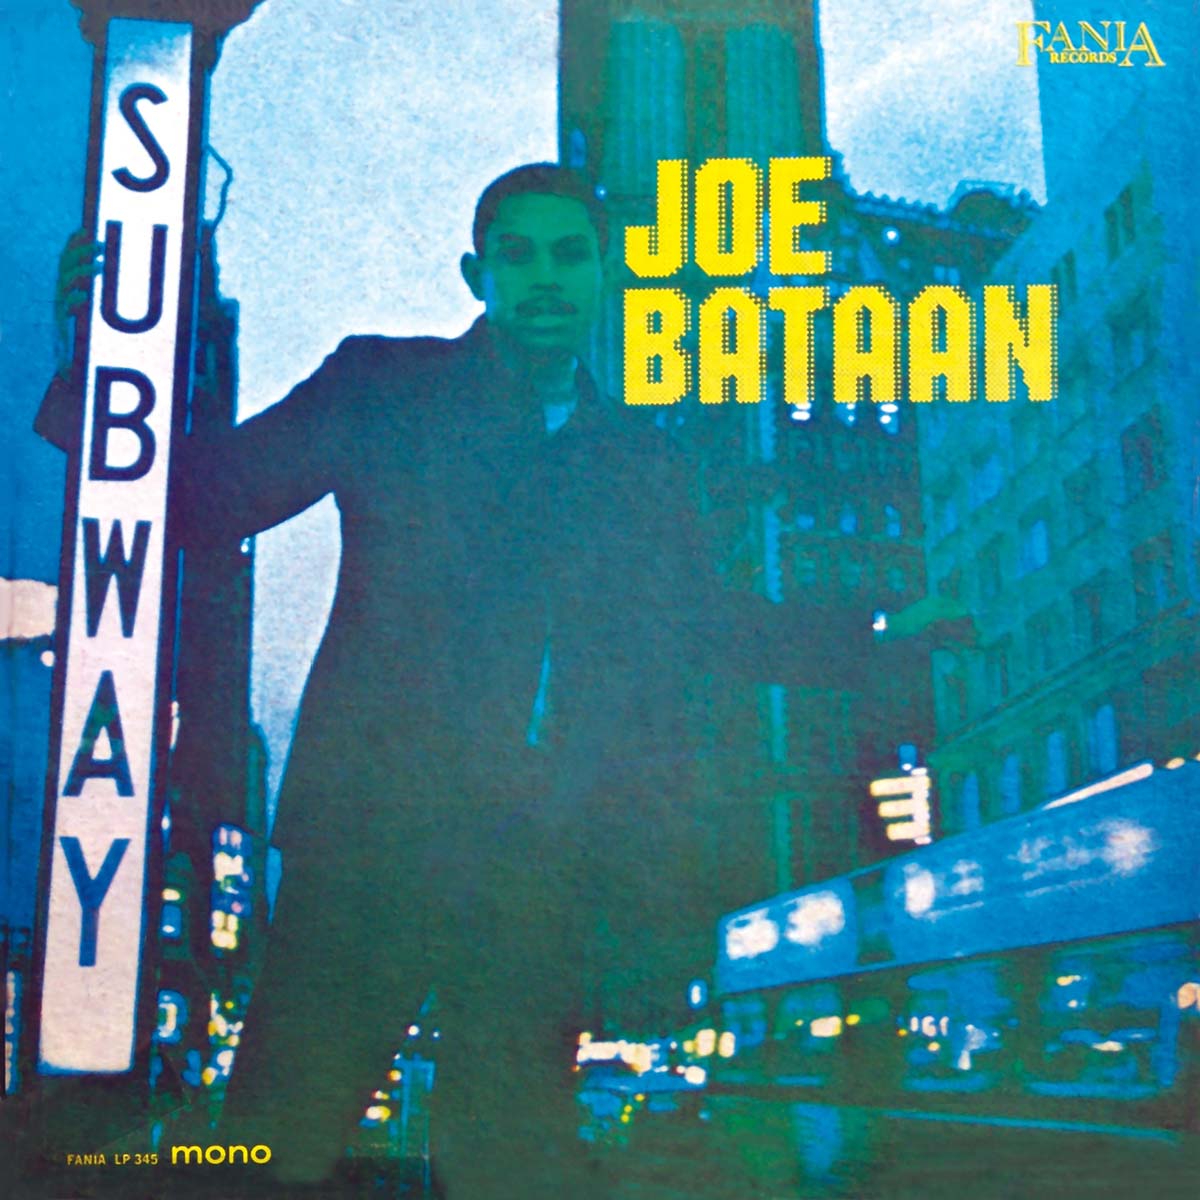 Featured Image for “SUBWAY JOE”